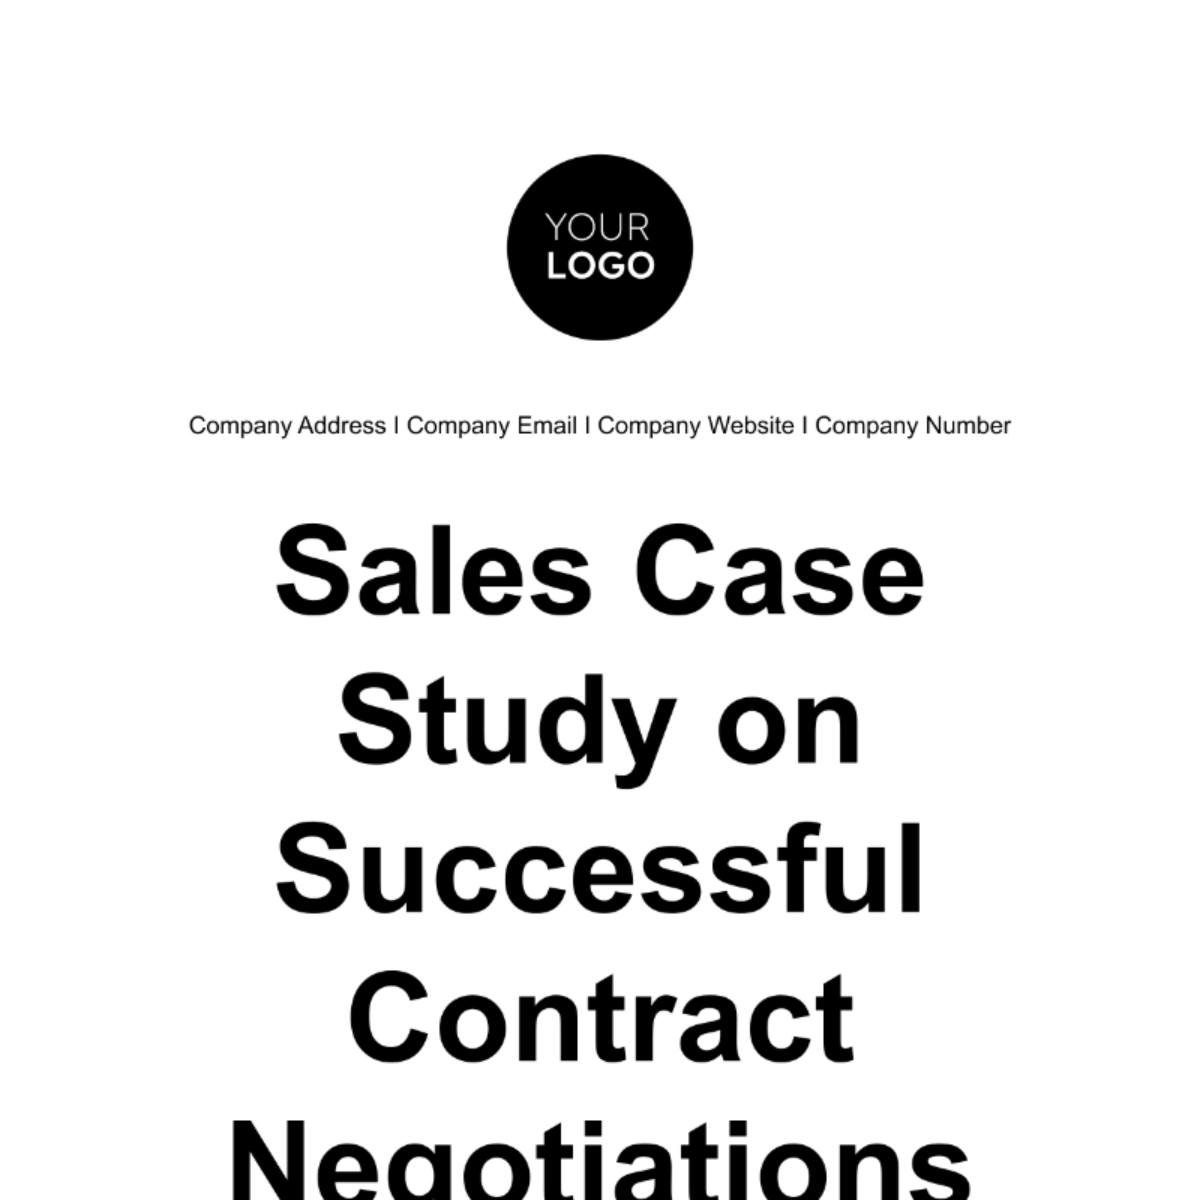 Sales Case Study on Successful Contract Negotiations Template